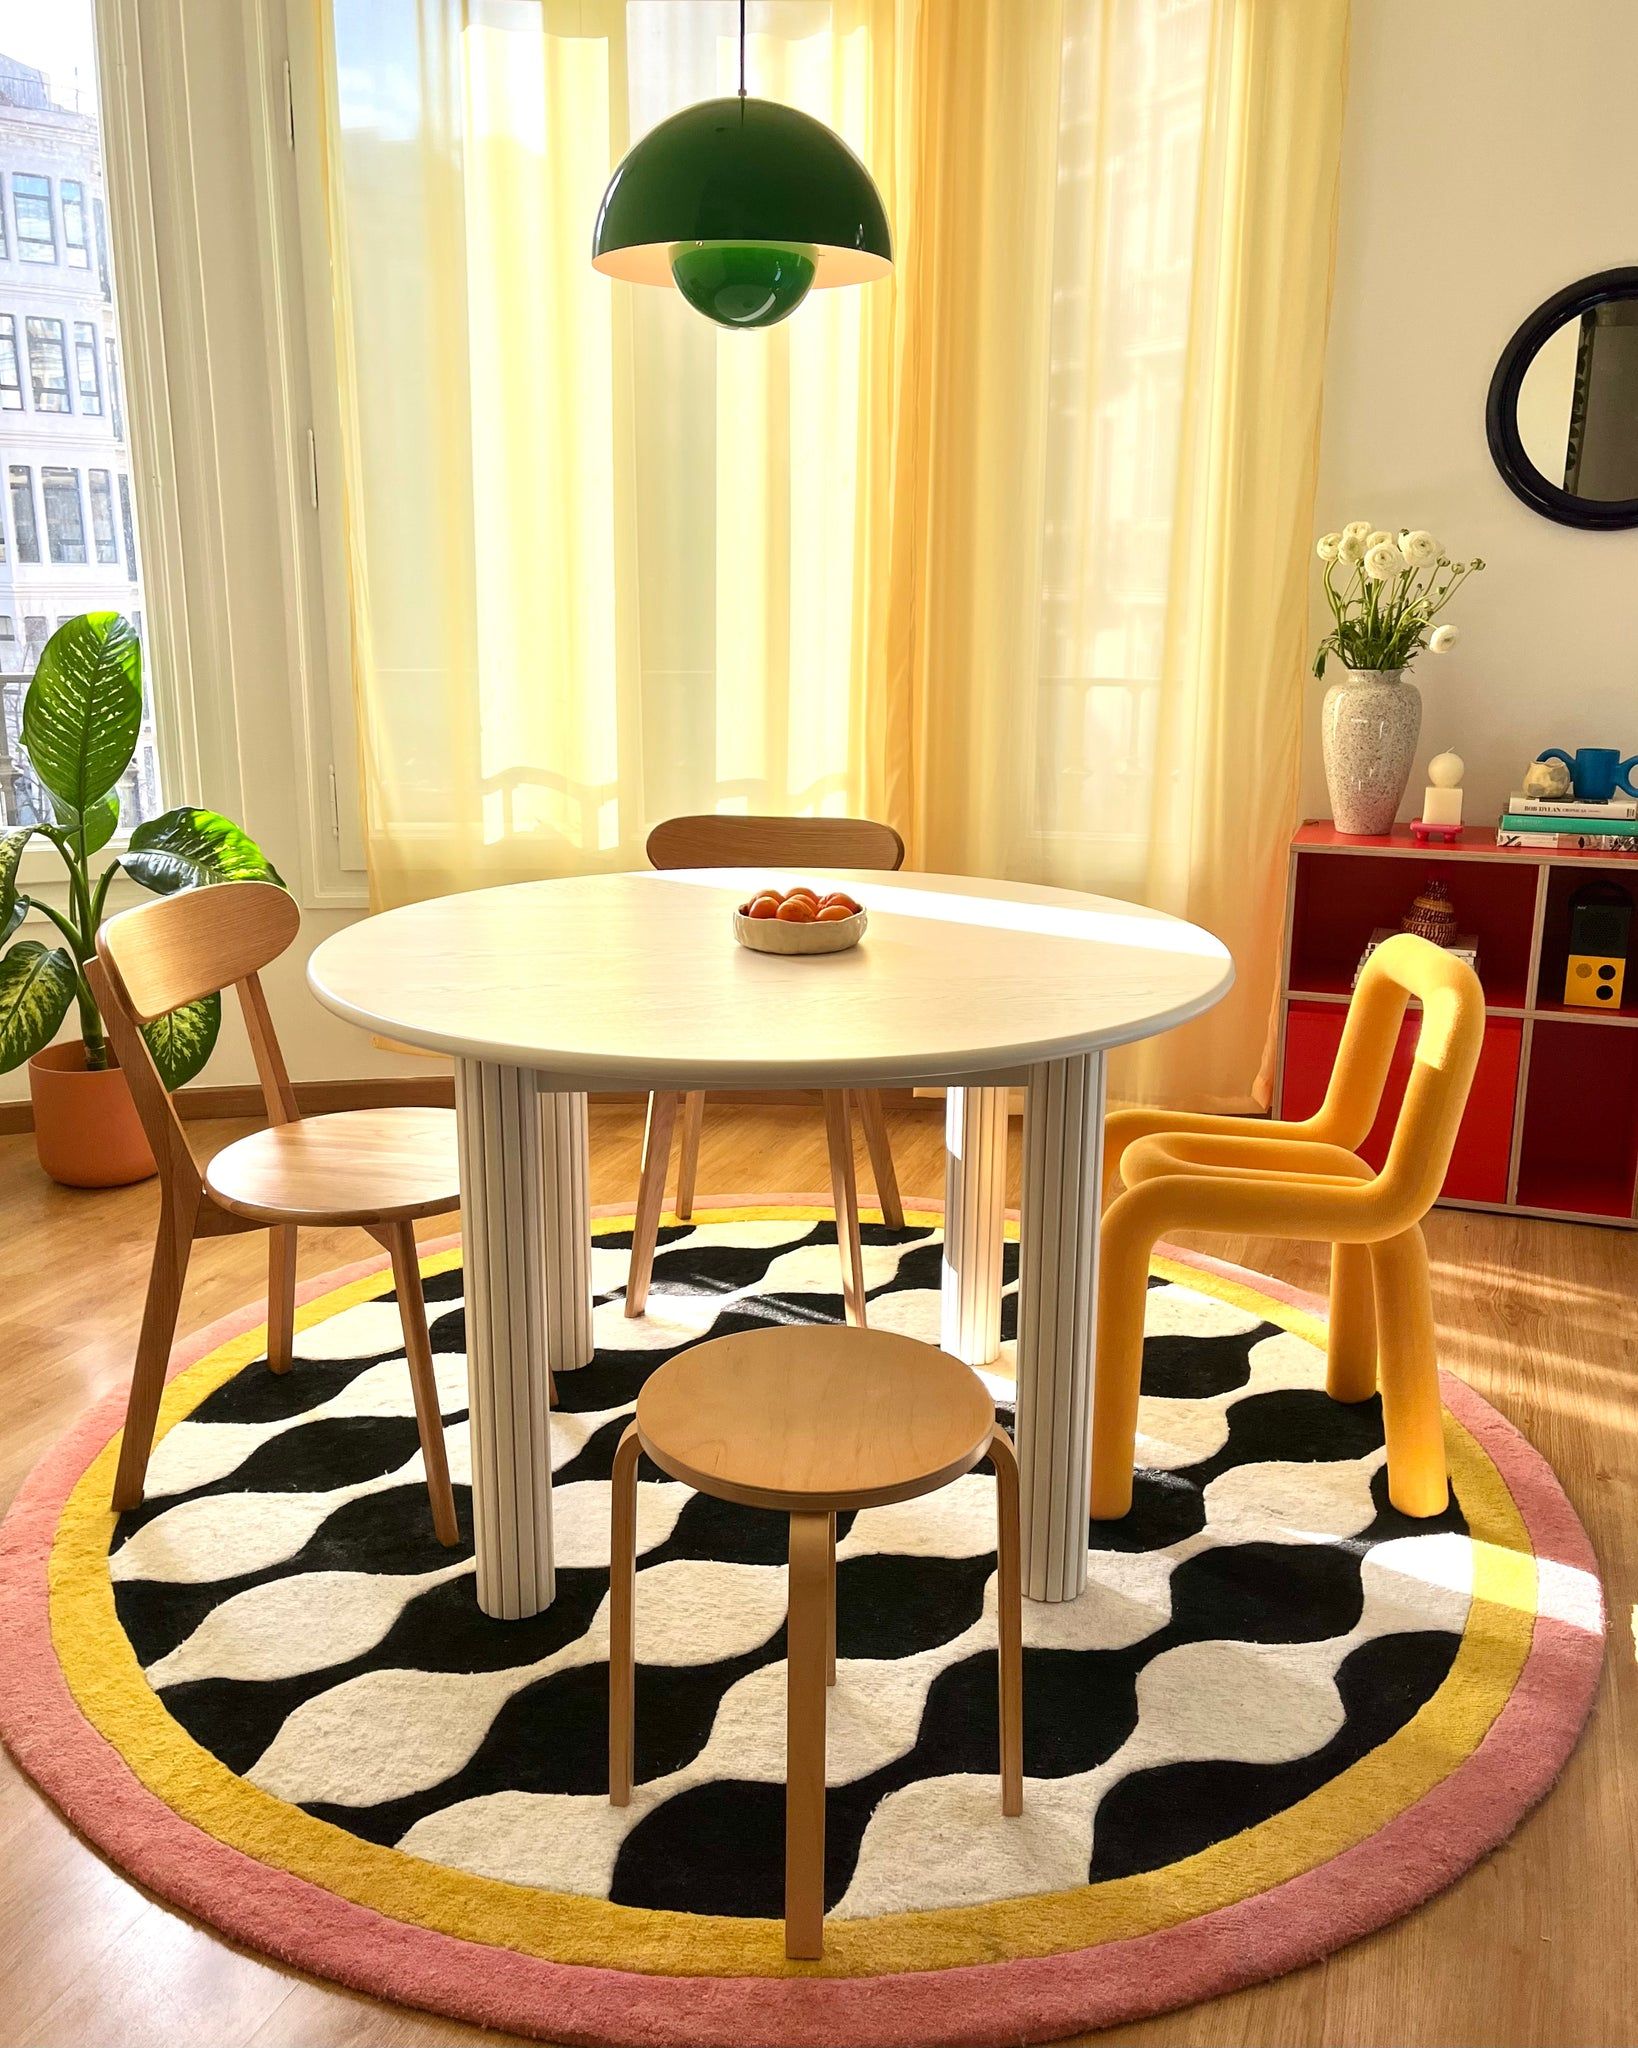 The Timeless Appeal of Round Rugs: A
Complete Guide